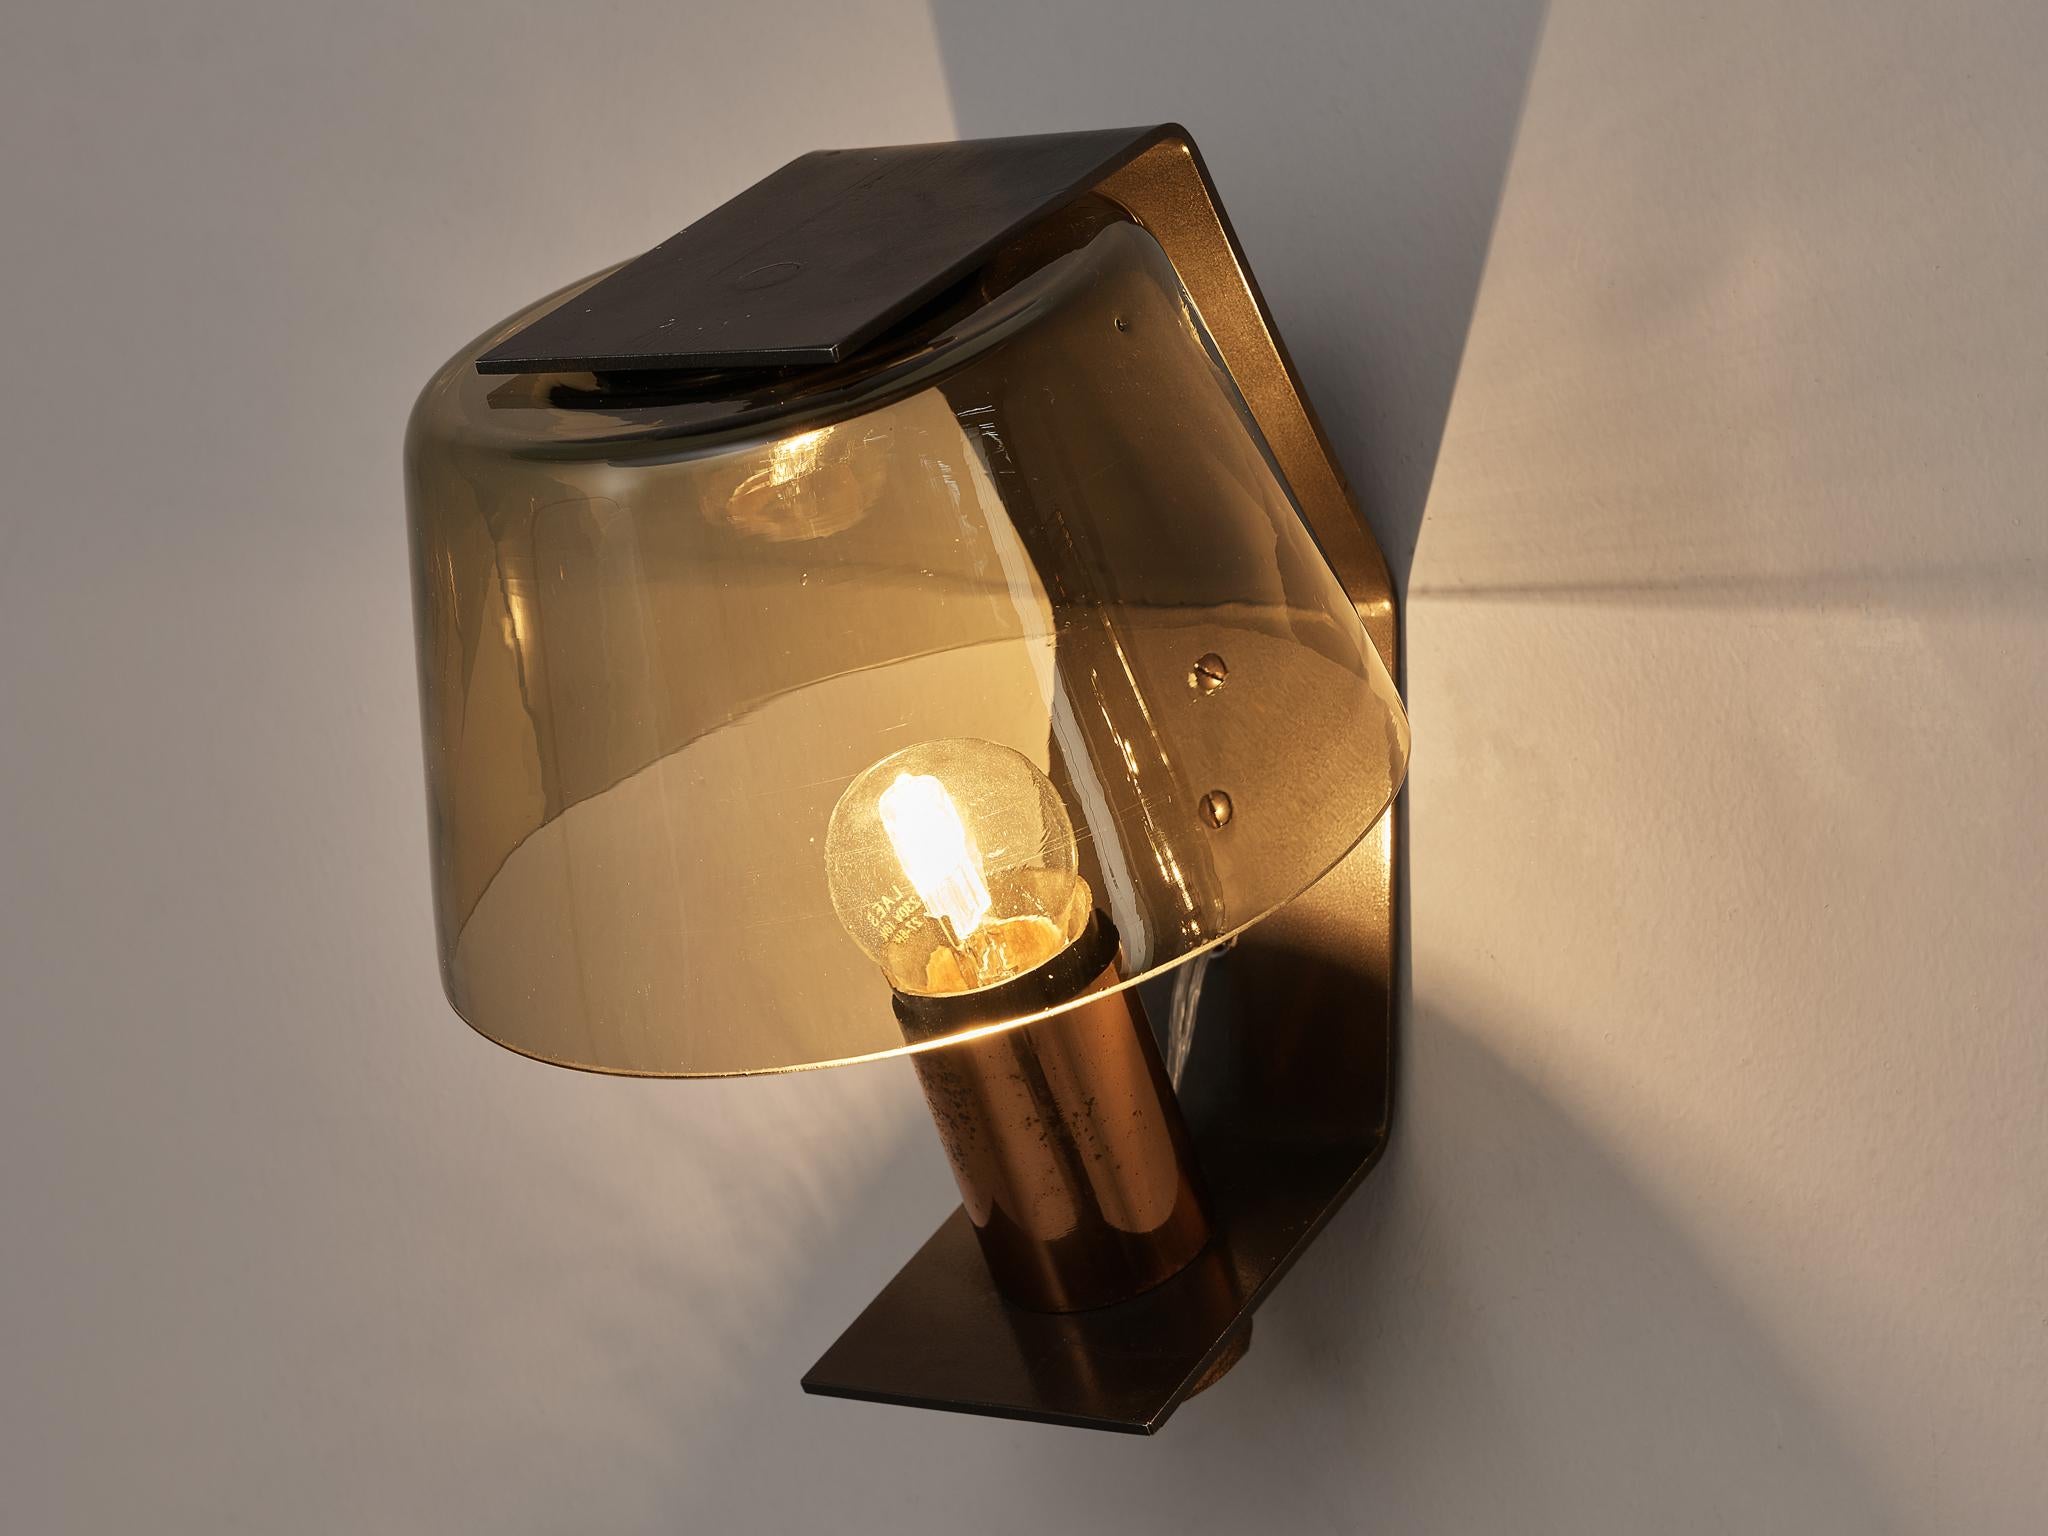 Scone, metal, copper, glass, Scandinavia, 1960s

Beautiful wall lamp made in Scandinavia in the 1960s. The design of this lamp is angled, which adds an interesting feature to this piece. The shade of the lamp rests in a metal frame. A base in copper